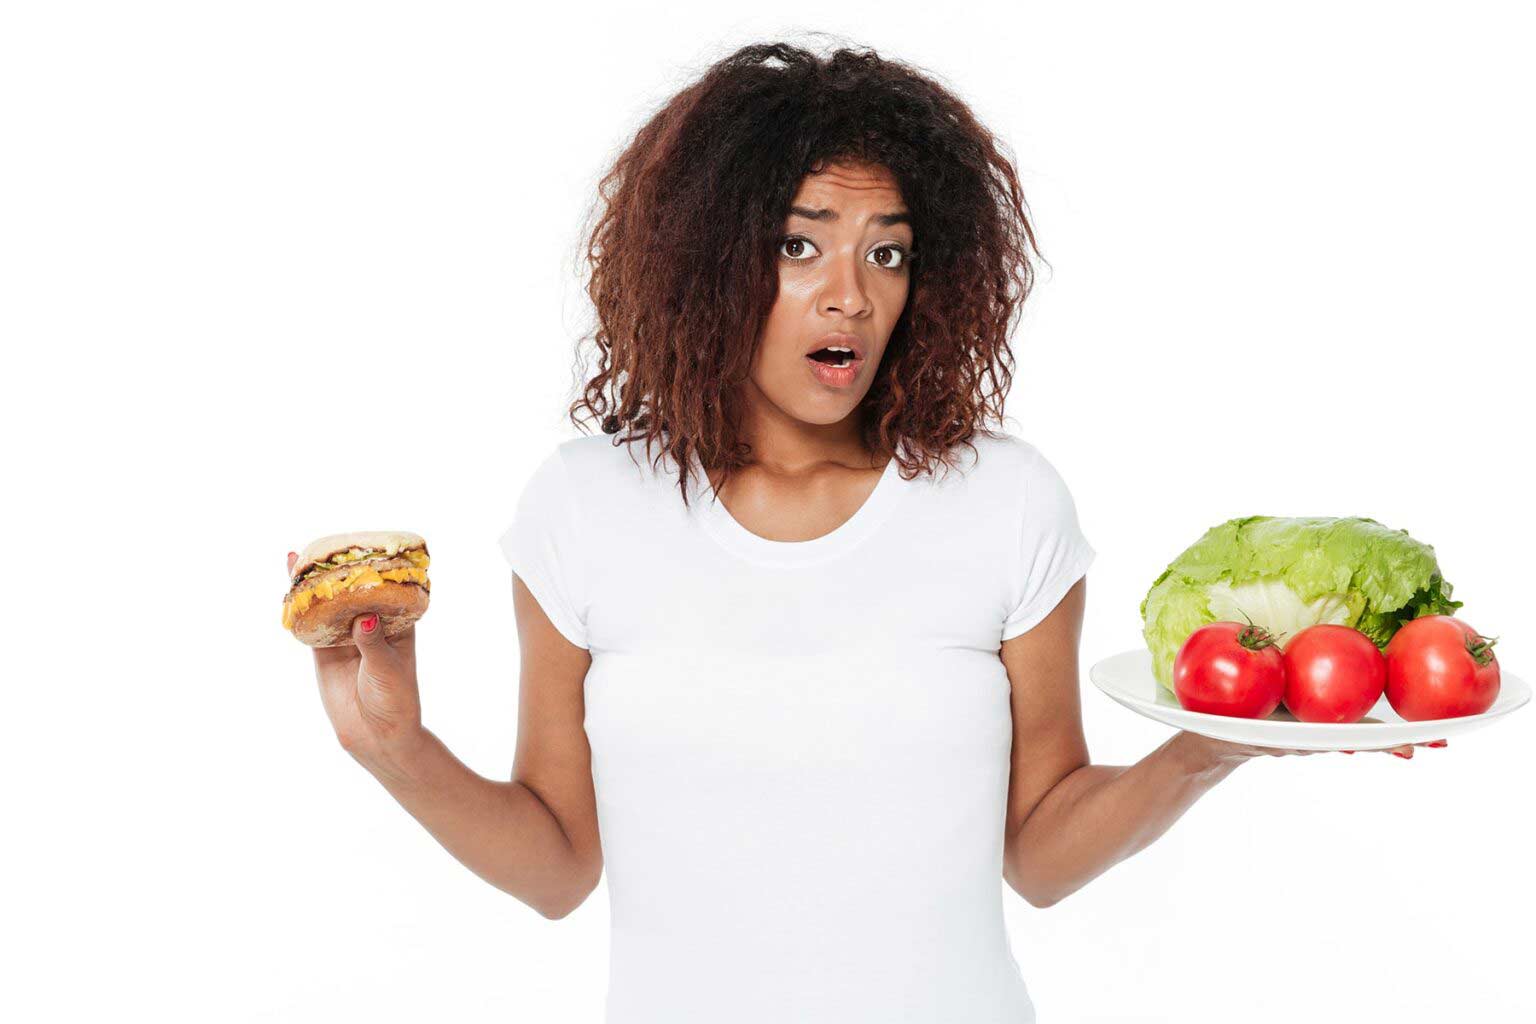 Maintaining a healthy eating lifestyle. What to do.